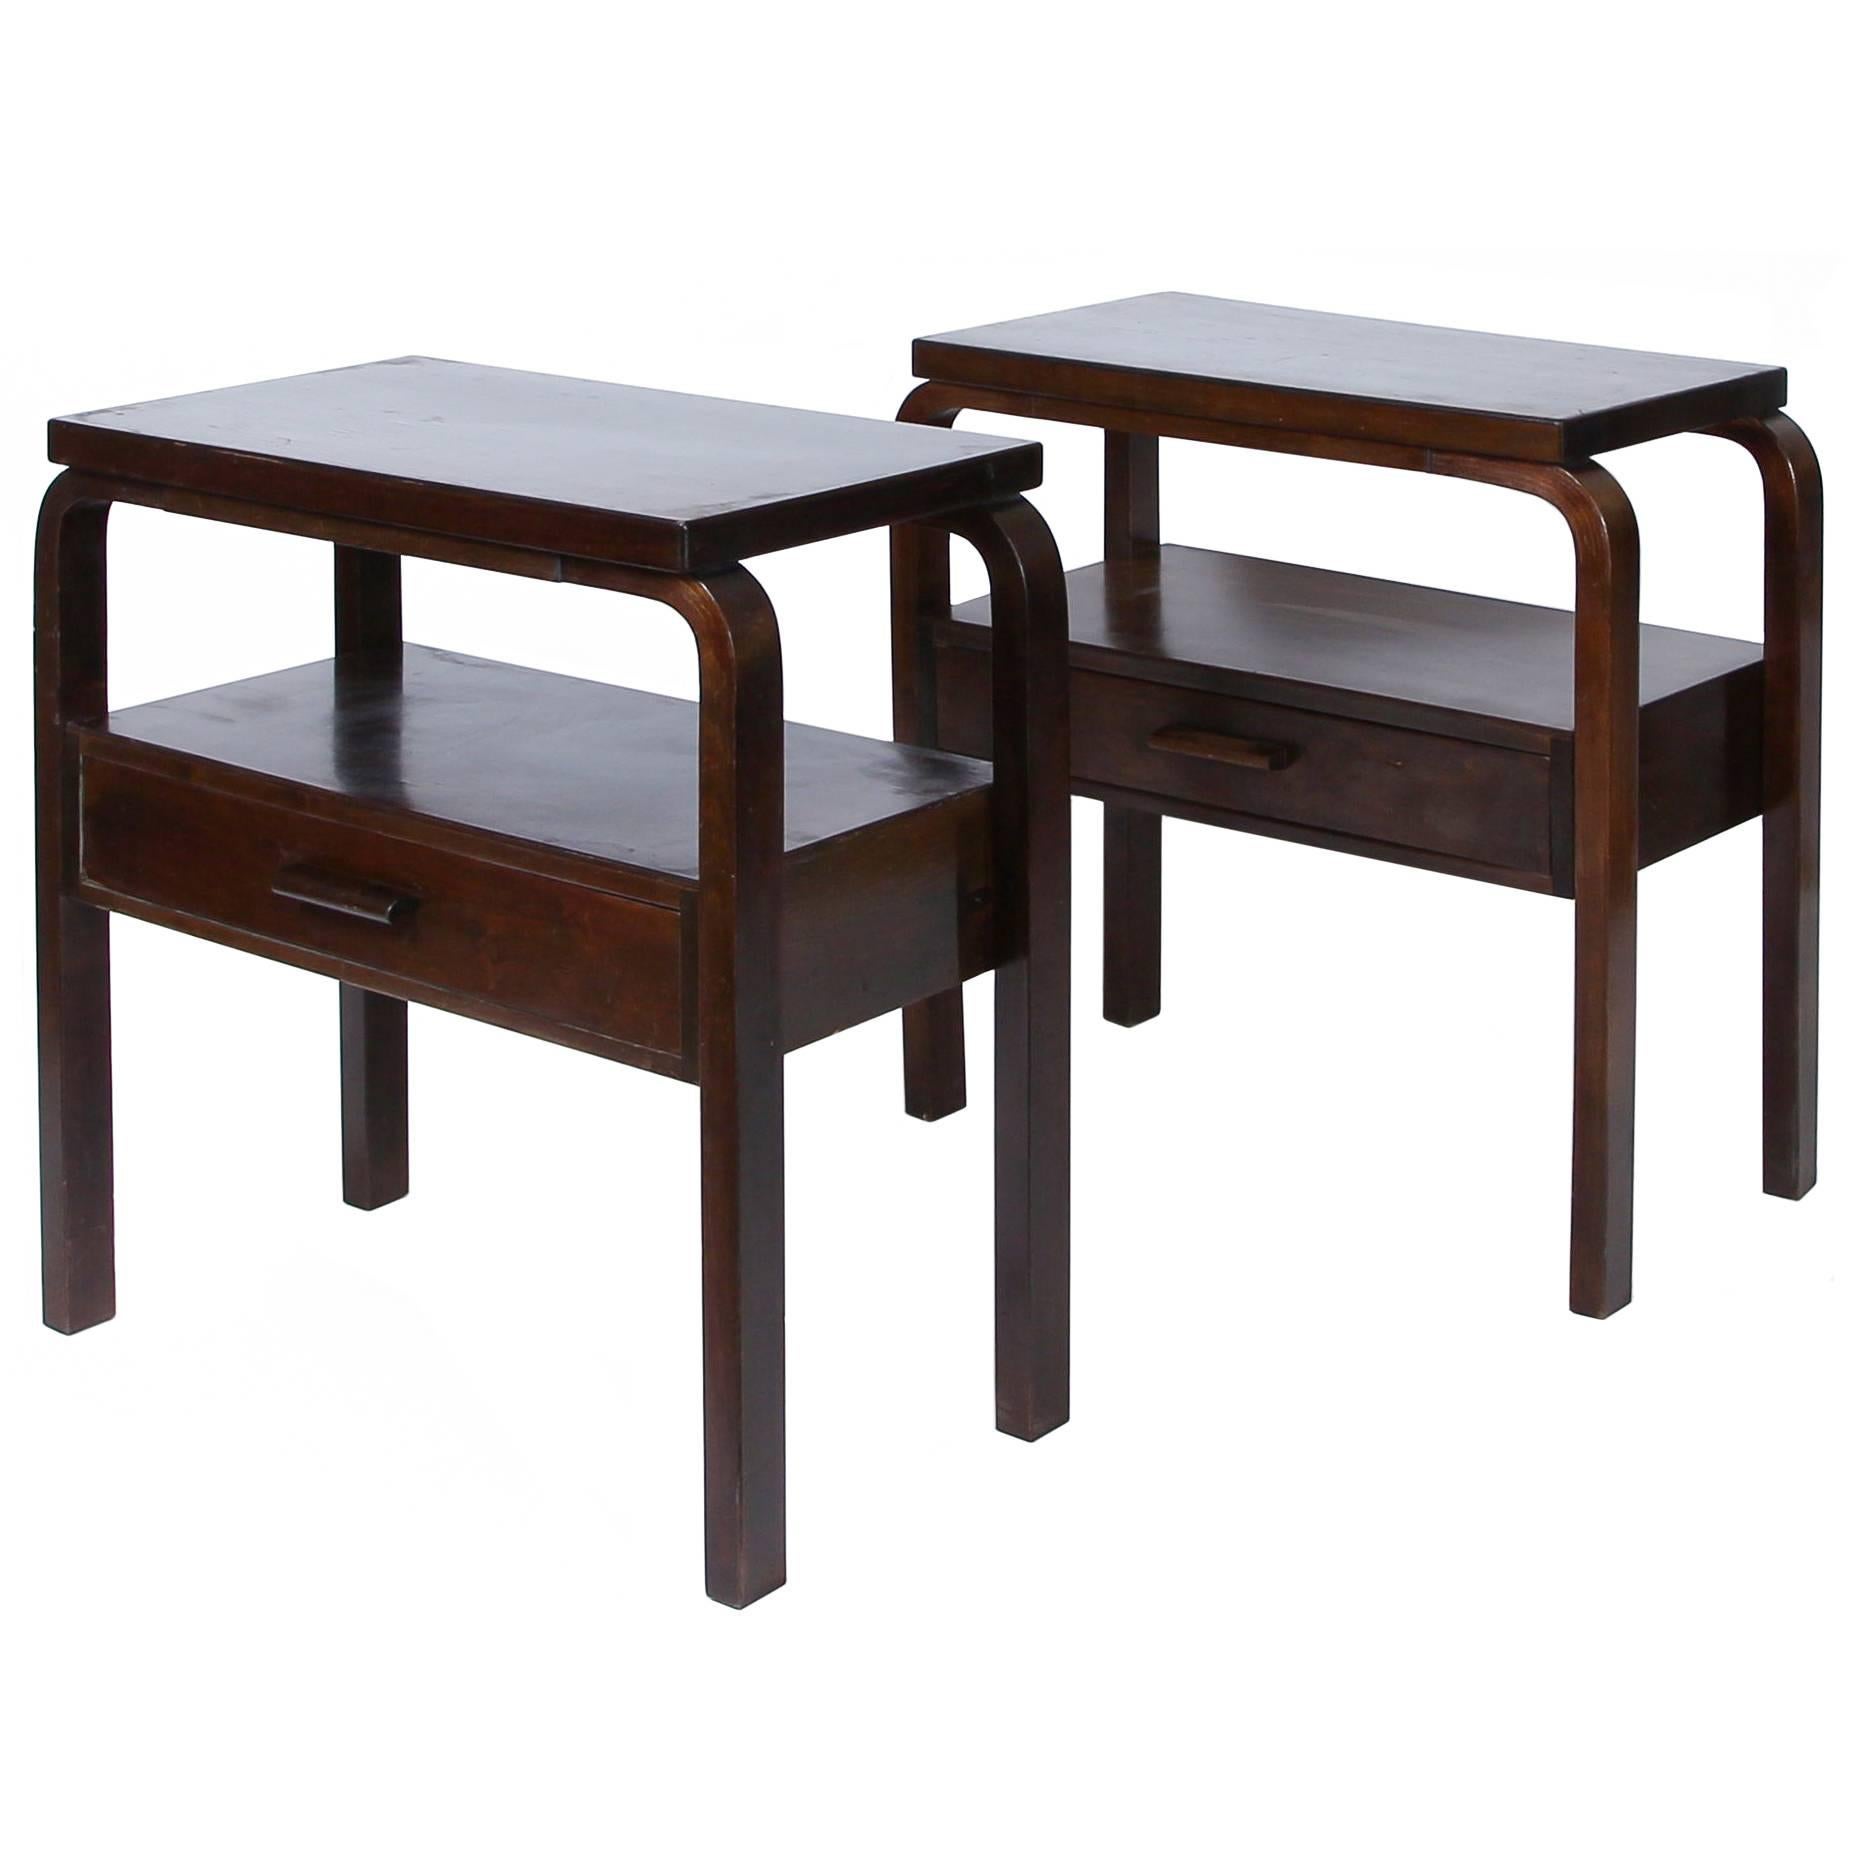 Early Alvar Aalto Pair of Side Tables, circa 1940s